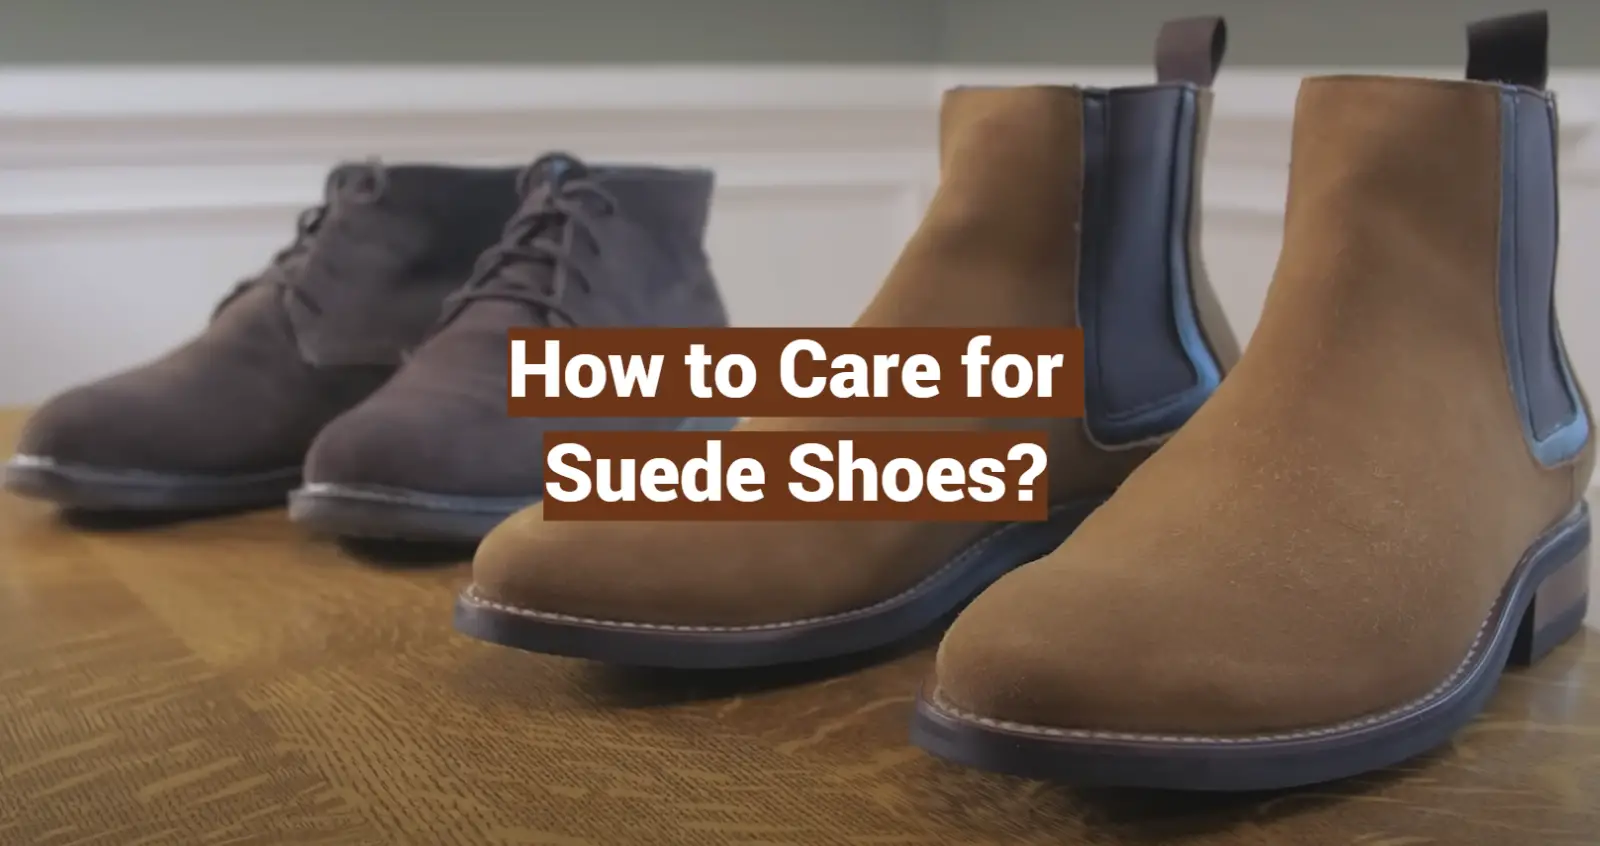 How to Care for Suede Shoes?